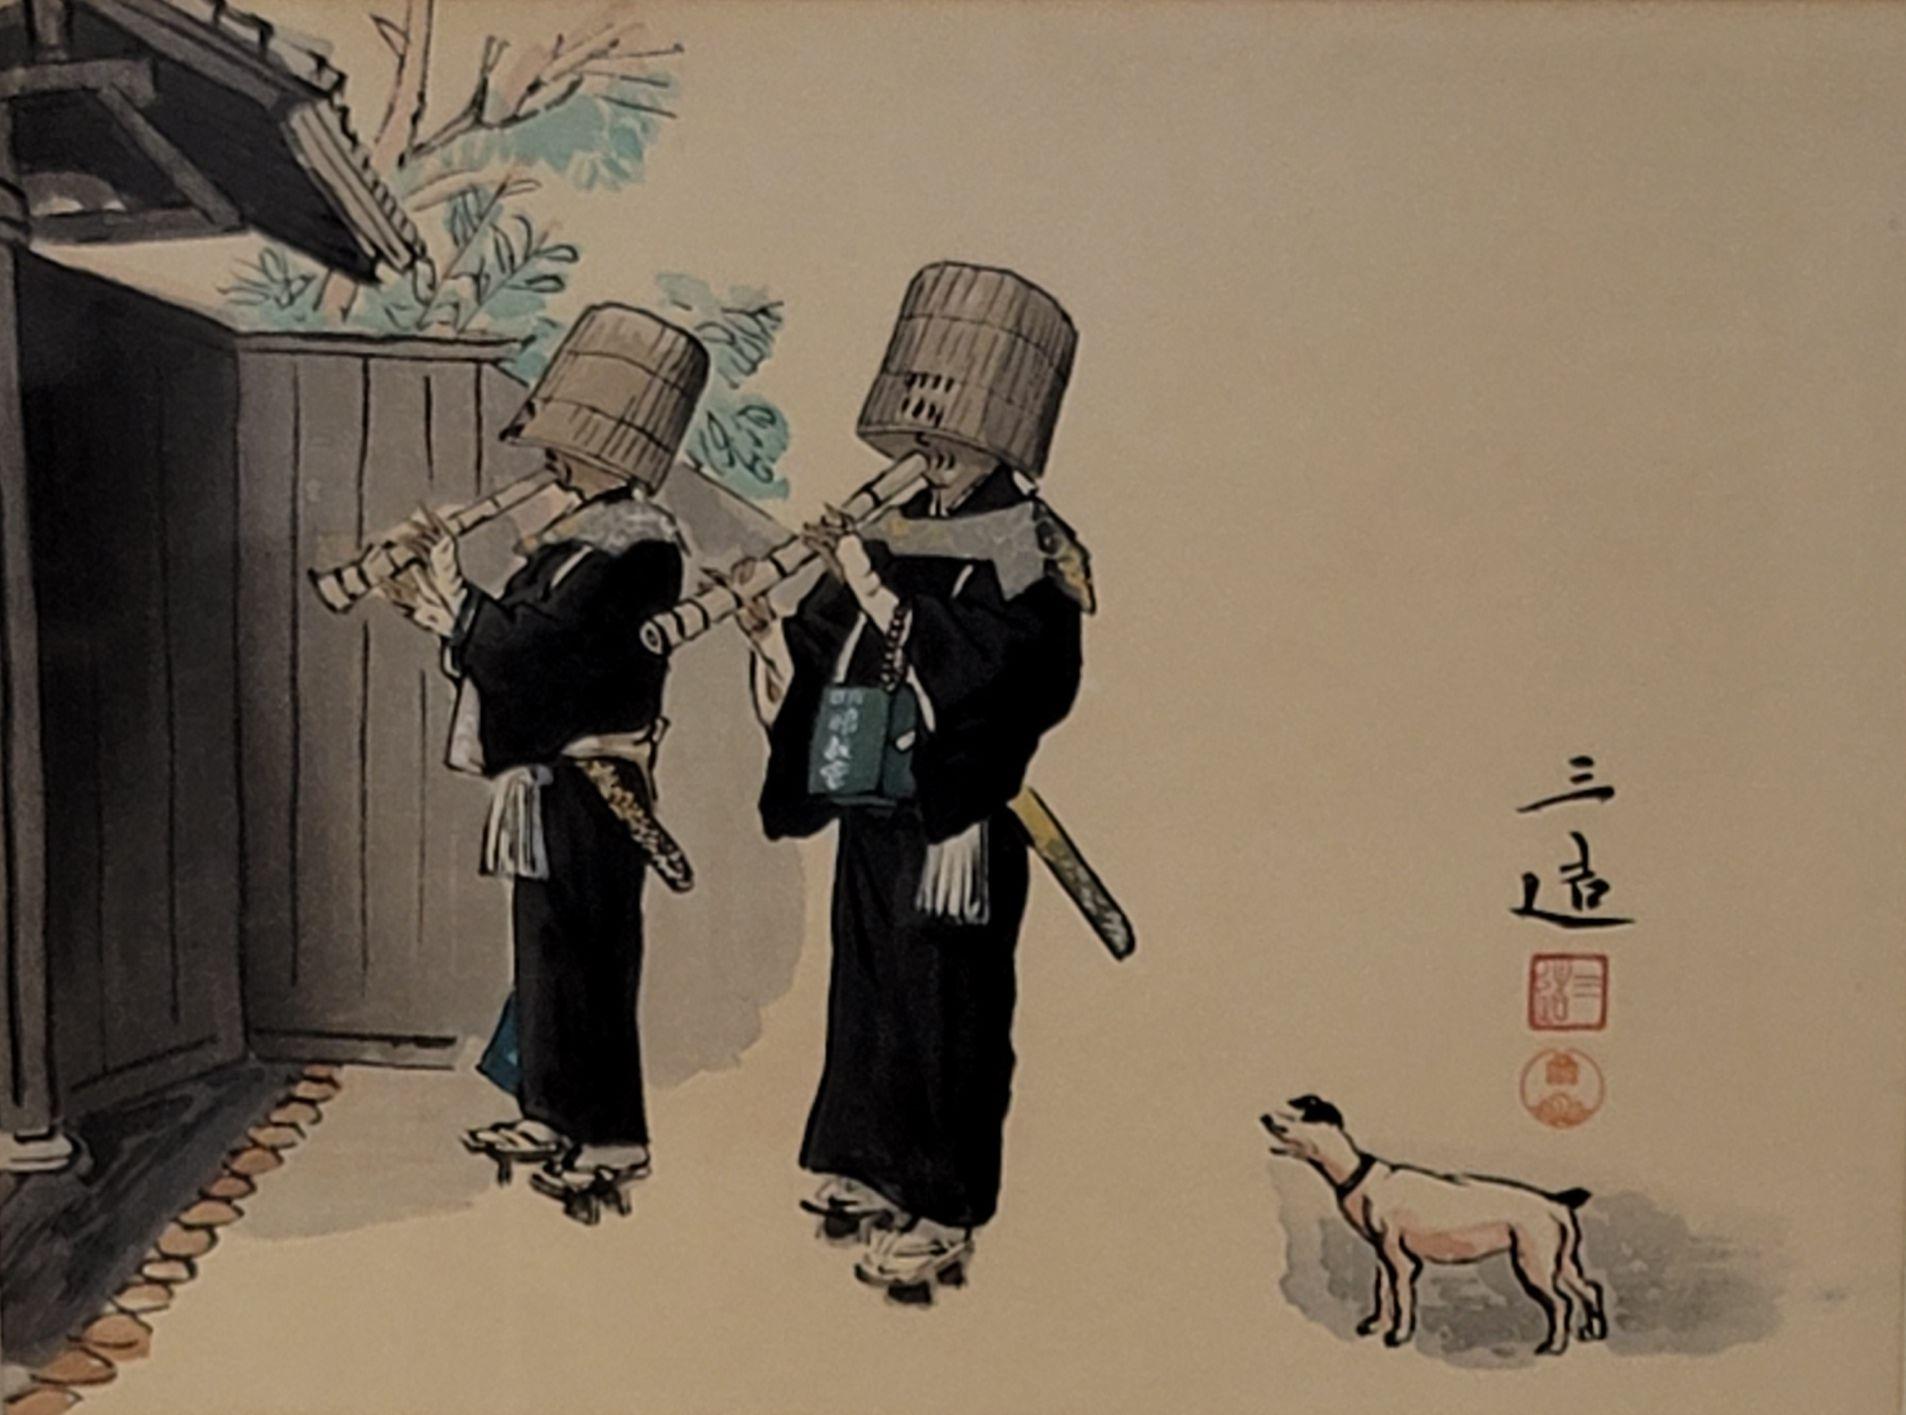 Original Woodblock work by Sanzo Wuda depicting two bamboo flute players at the gate with the dog, framed and signed.
Dimension: Image 13 1/2